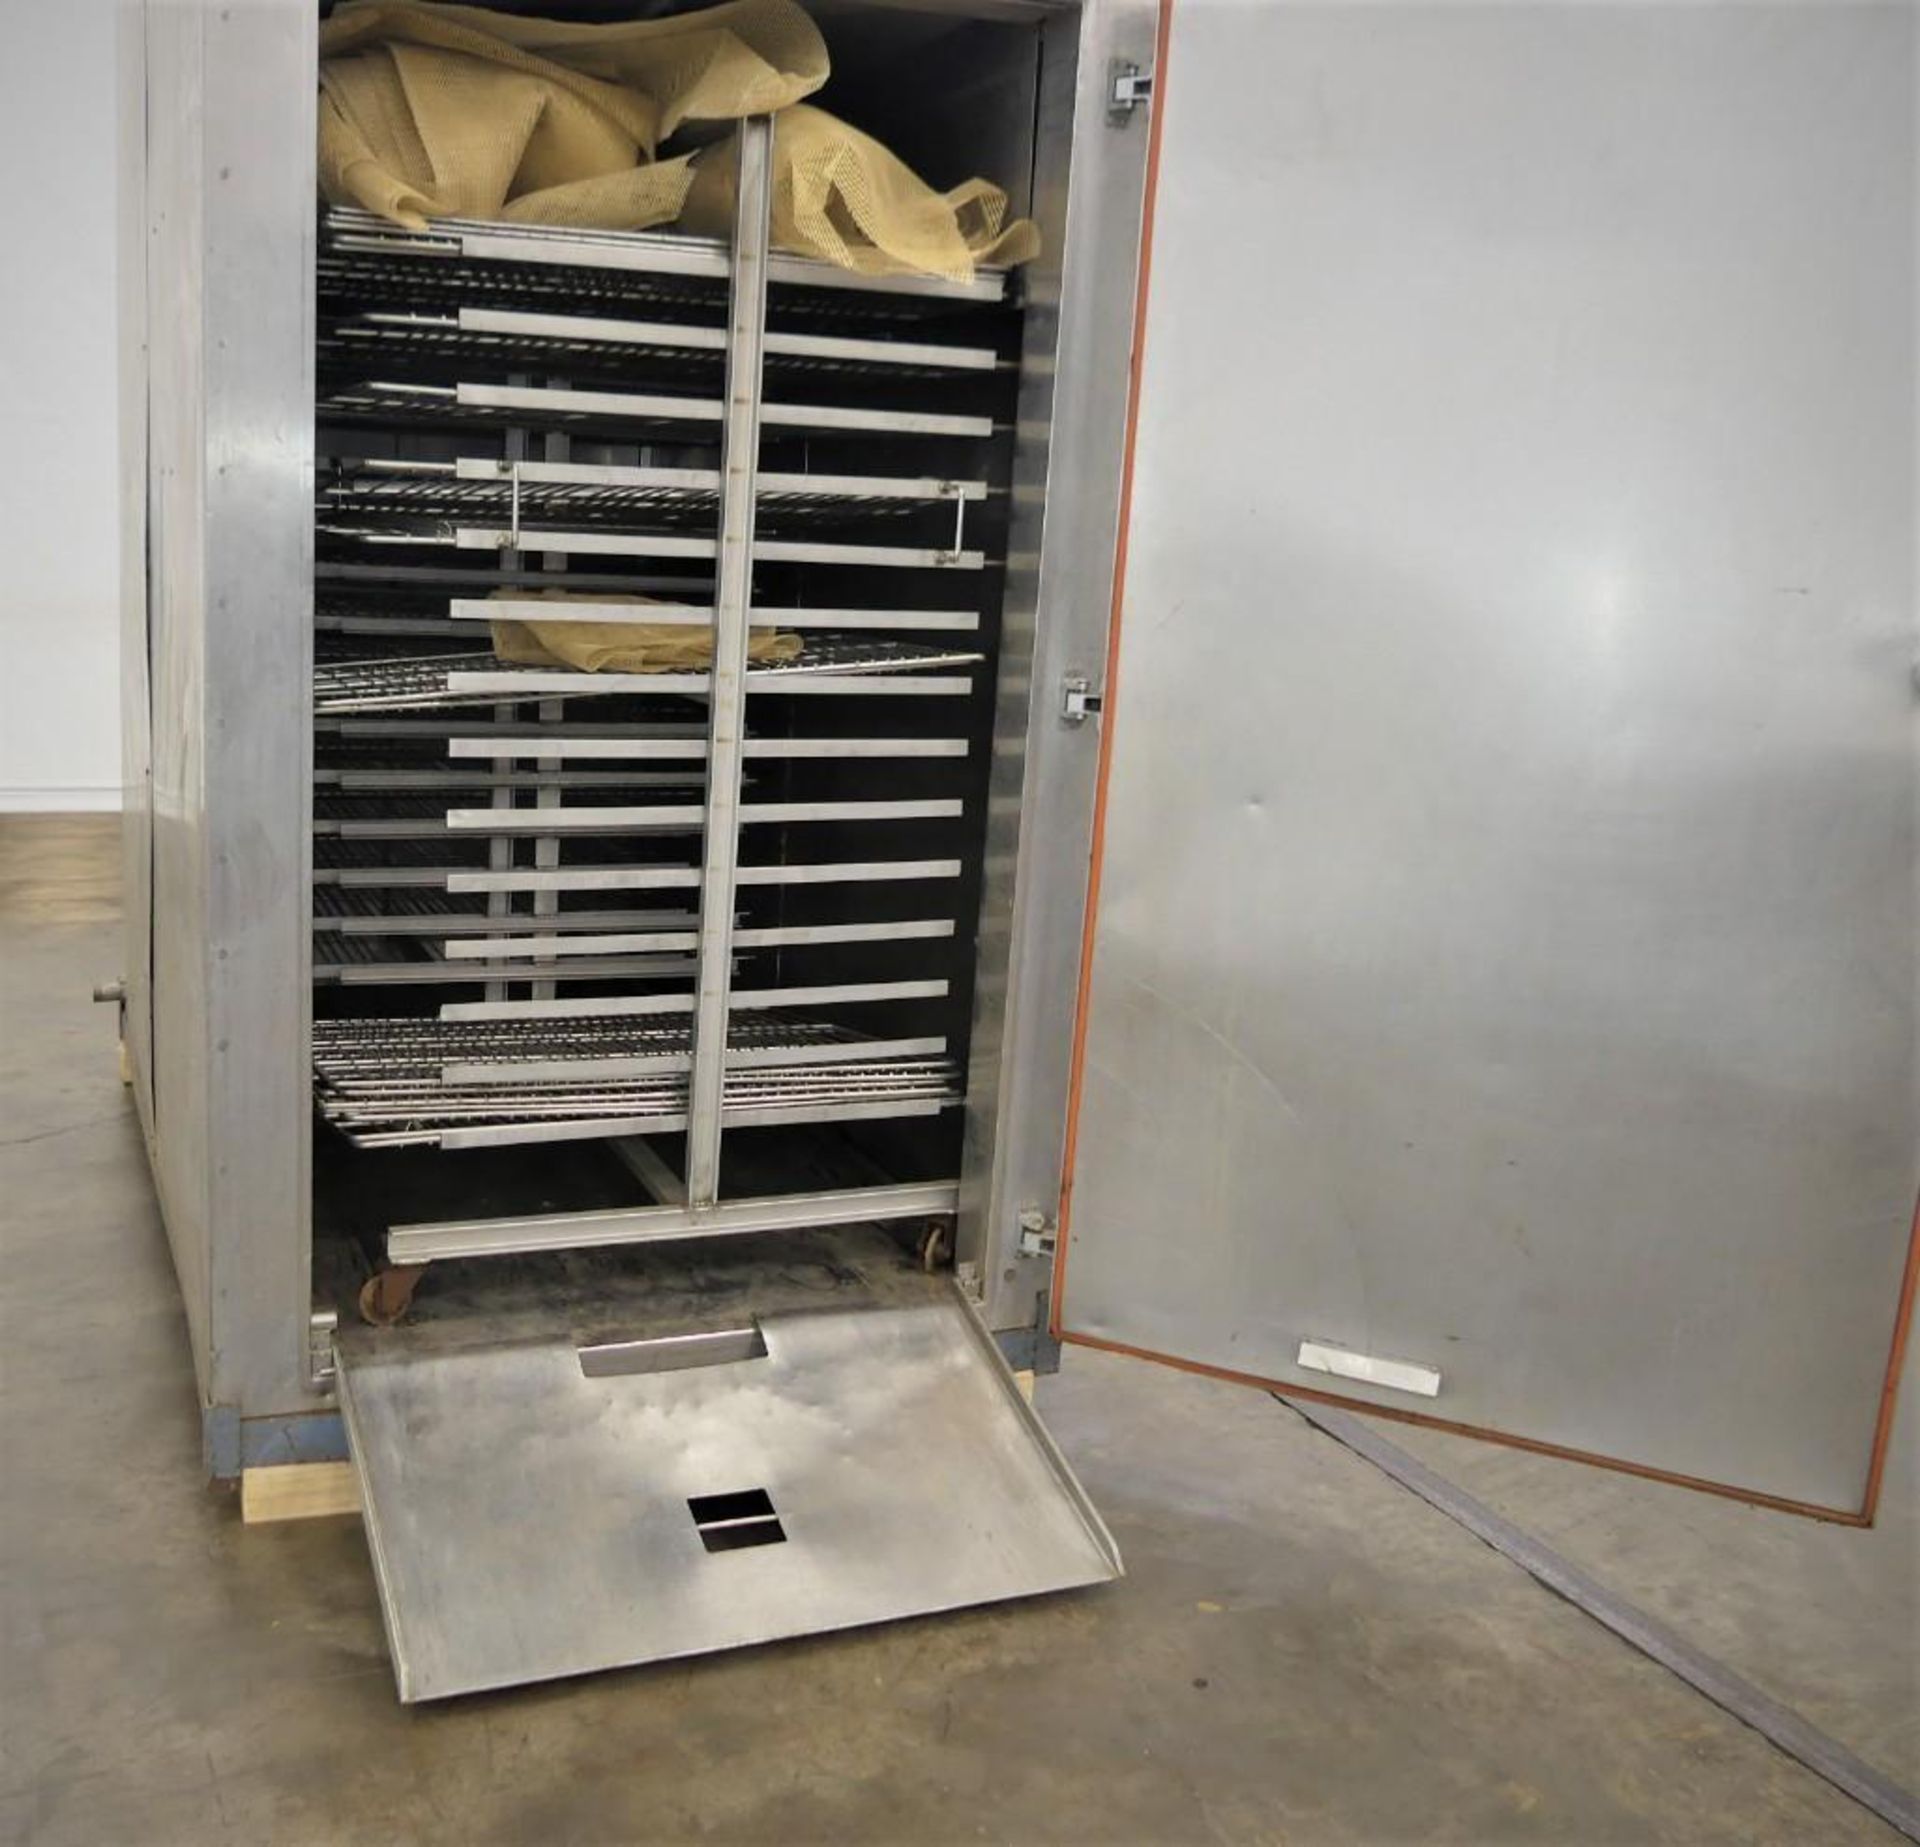 Maurer & Sohne Two Truck Stainless Smokehouse - Image 5 of 8